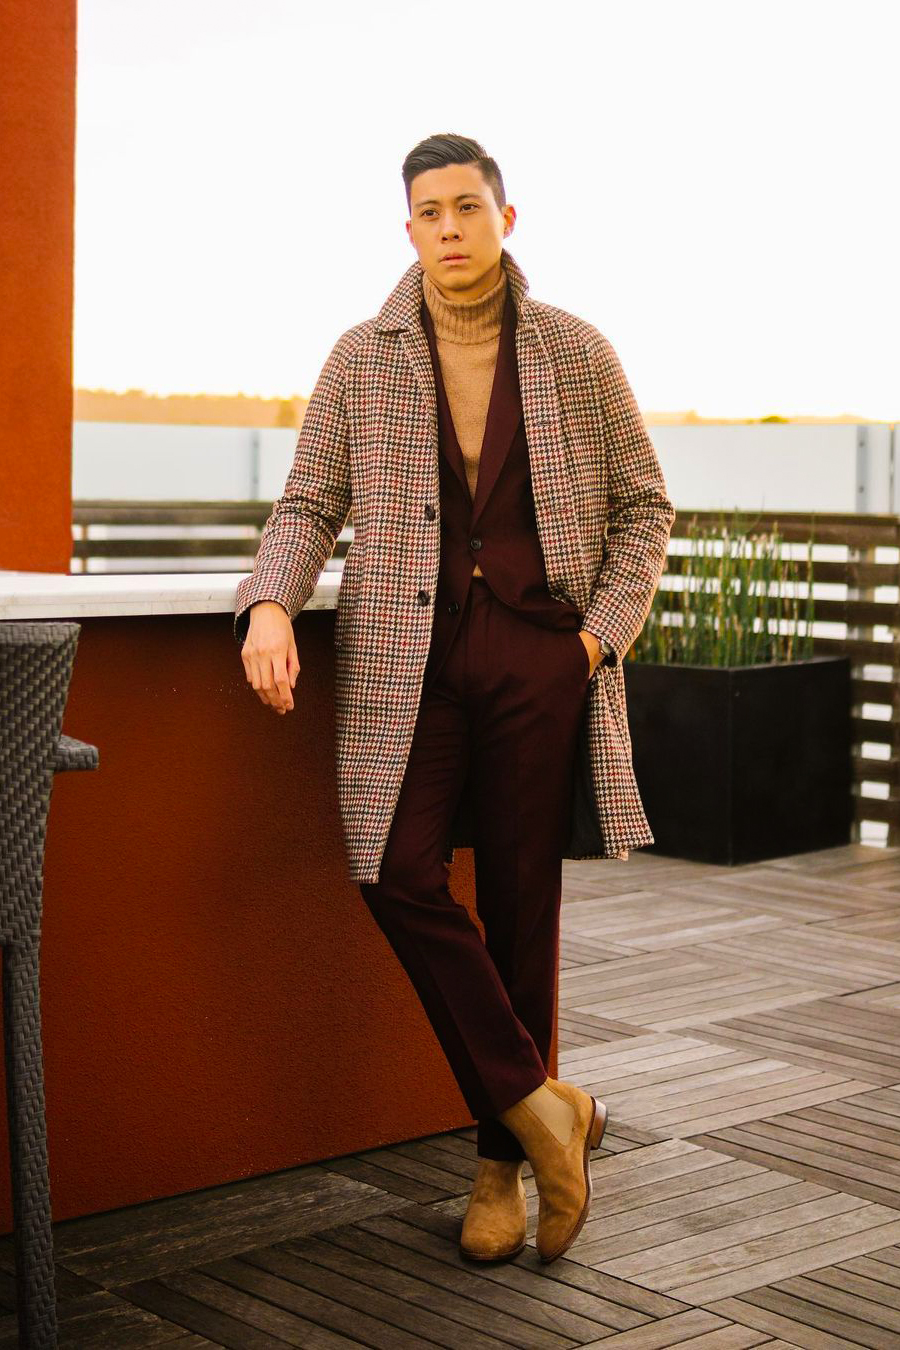 Burgundy suit, tan turtleneck, brown houndstooth overcoat, and brown suede Chelsea boots outfit